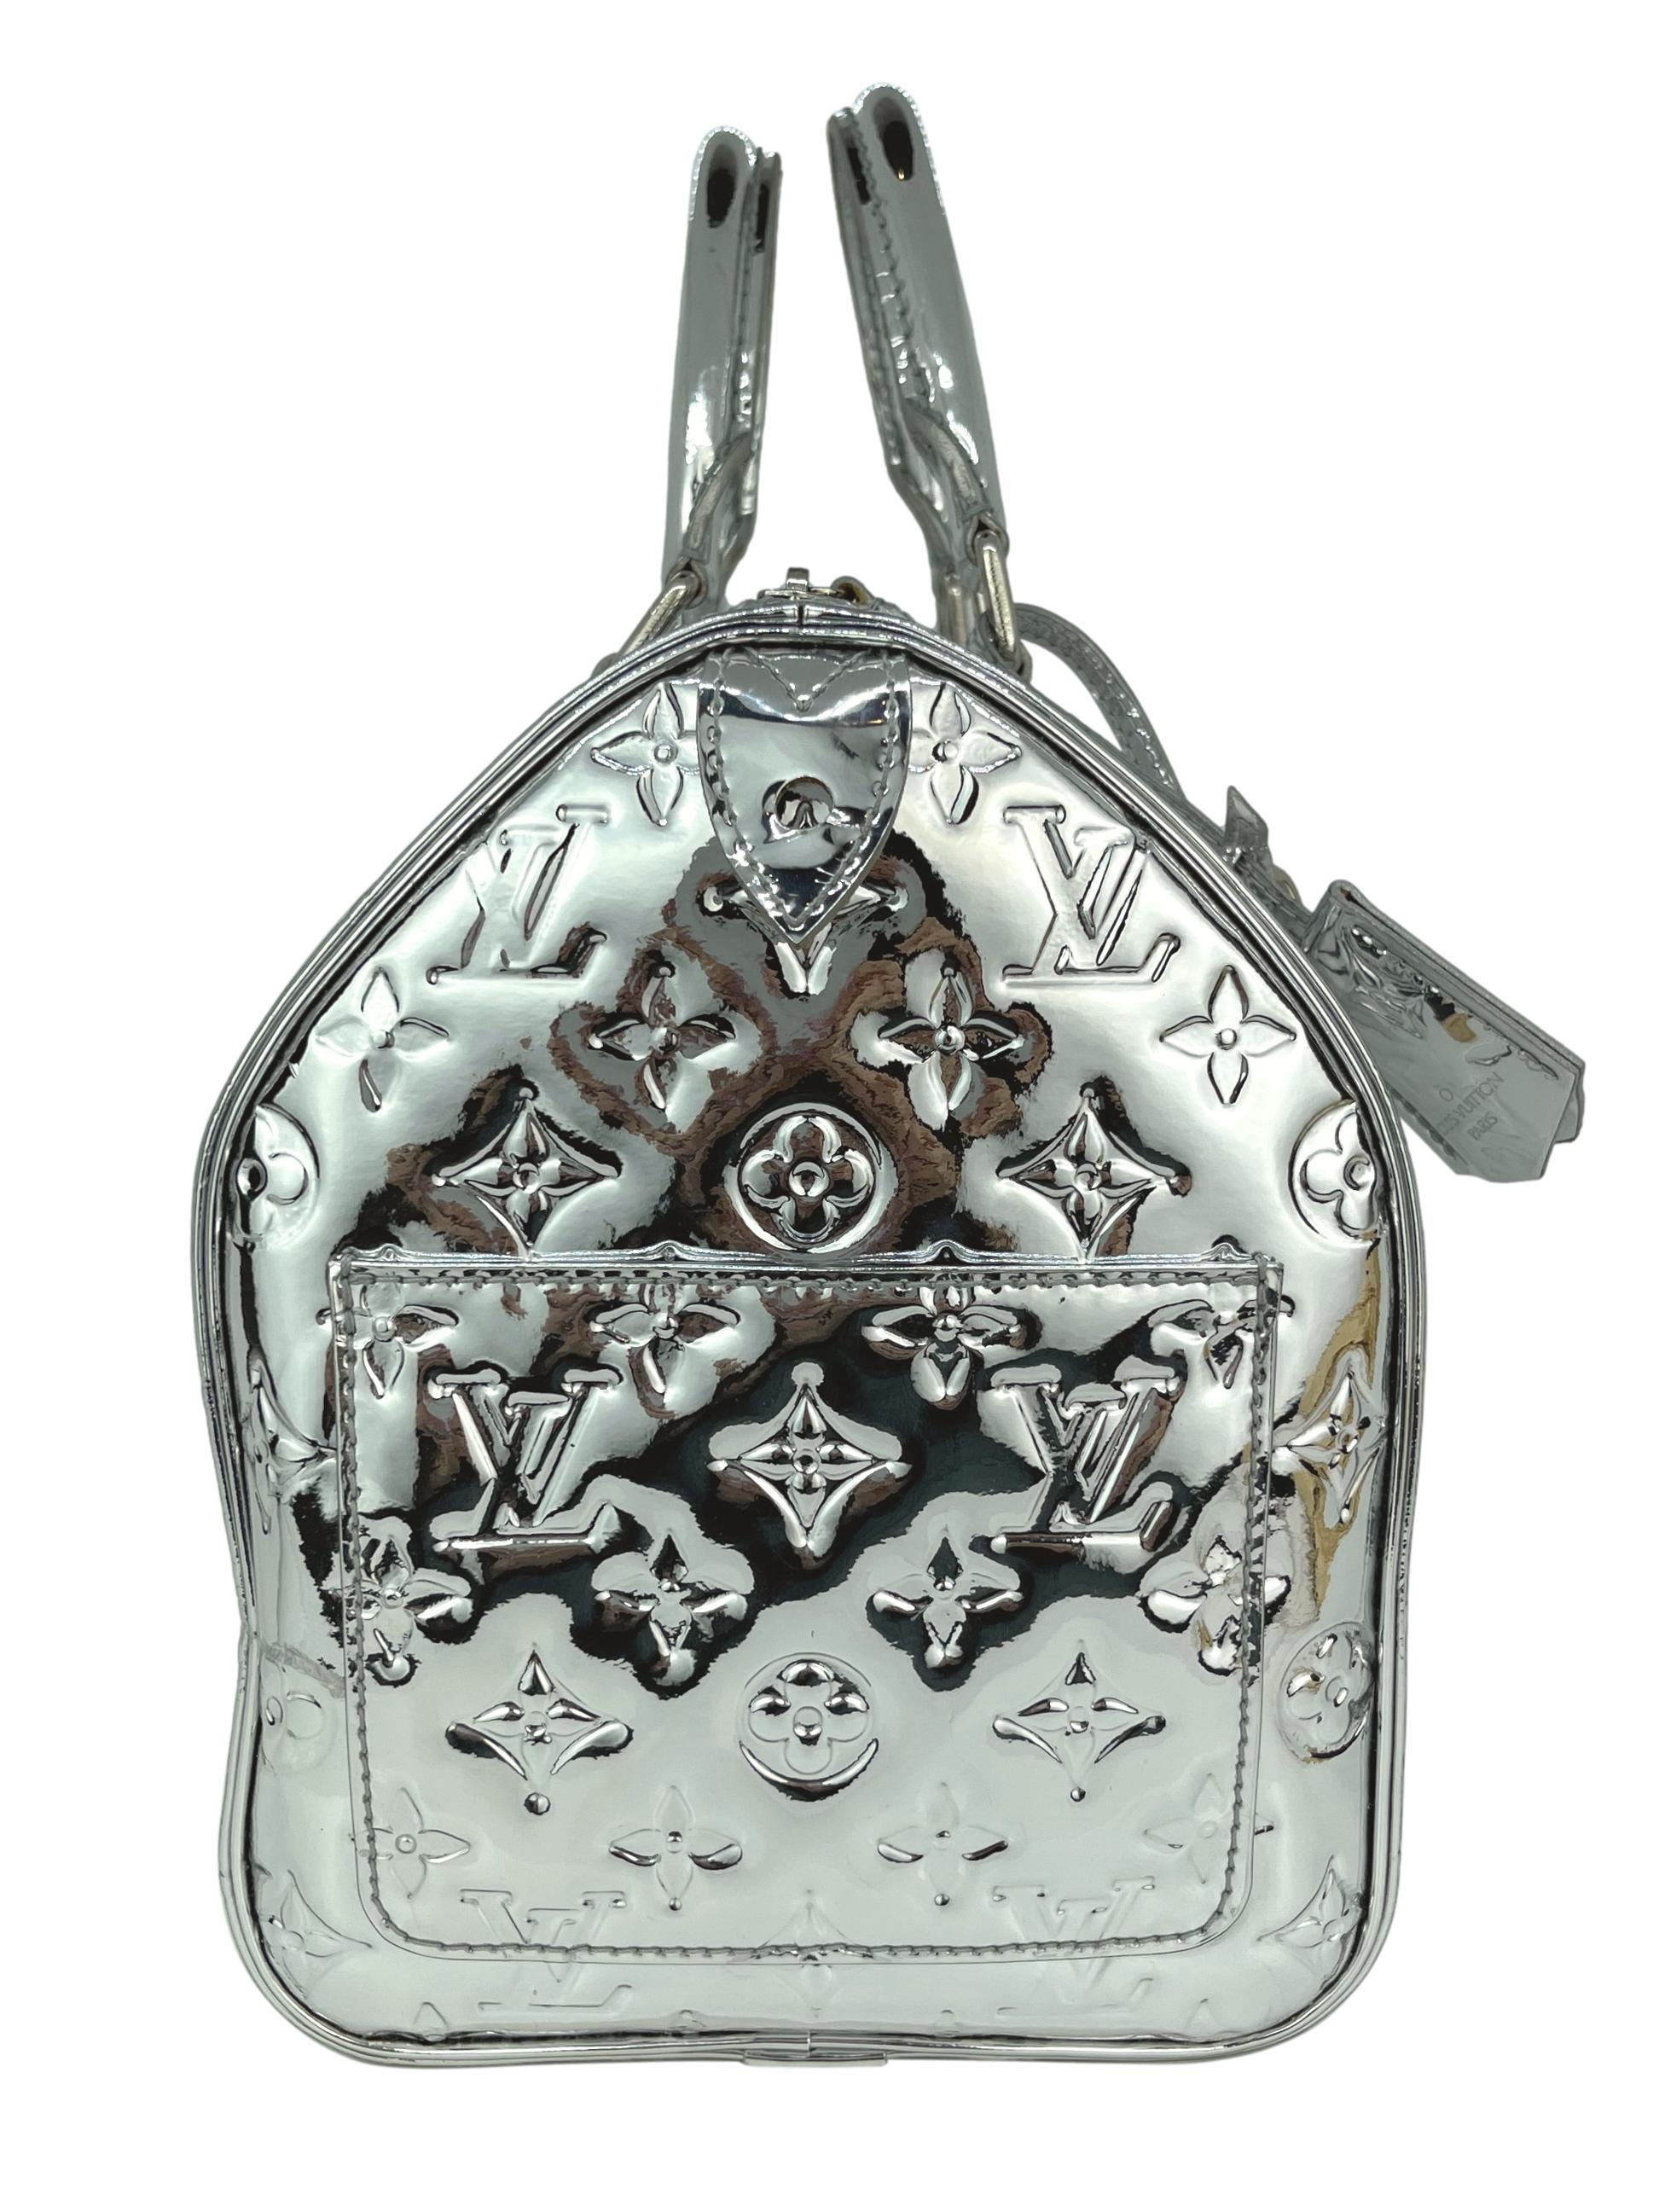 Louis Vuitton Limited Edition Silver Monogram Miroir Top Handle Speedy 30, 2006. The iconic speedy was first introduced in the 1930's and was designed as an alternative for the larger 